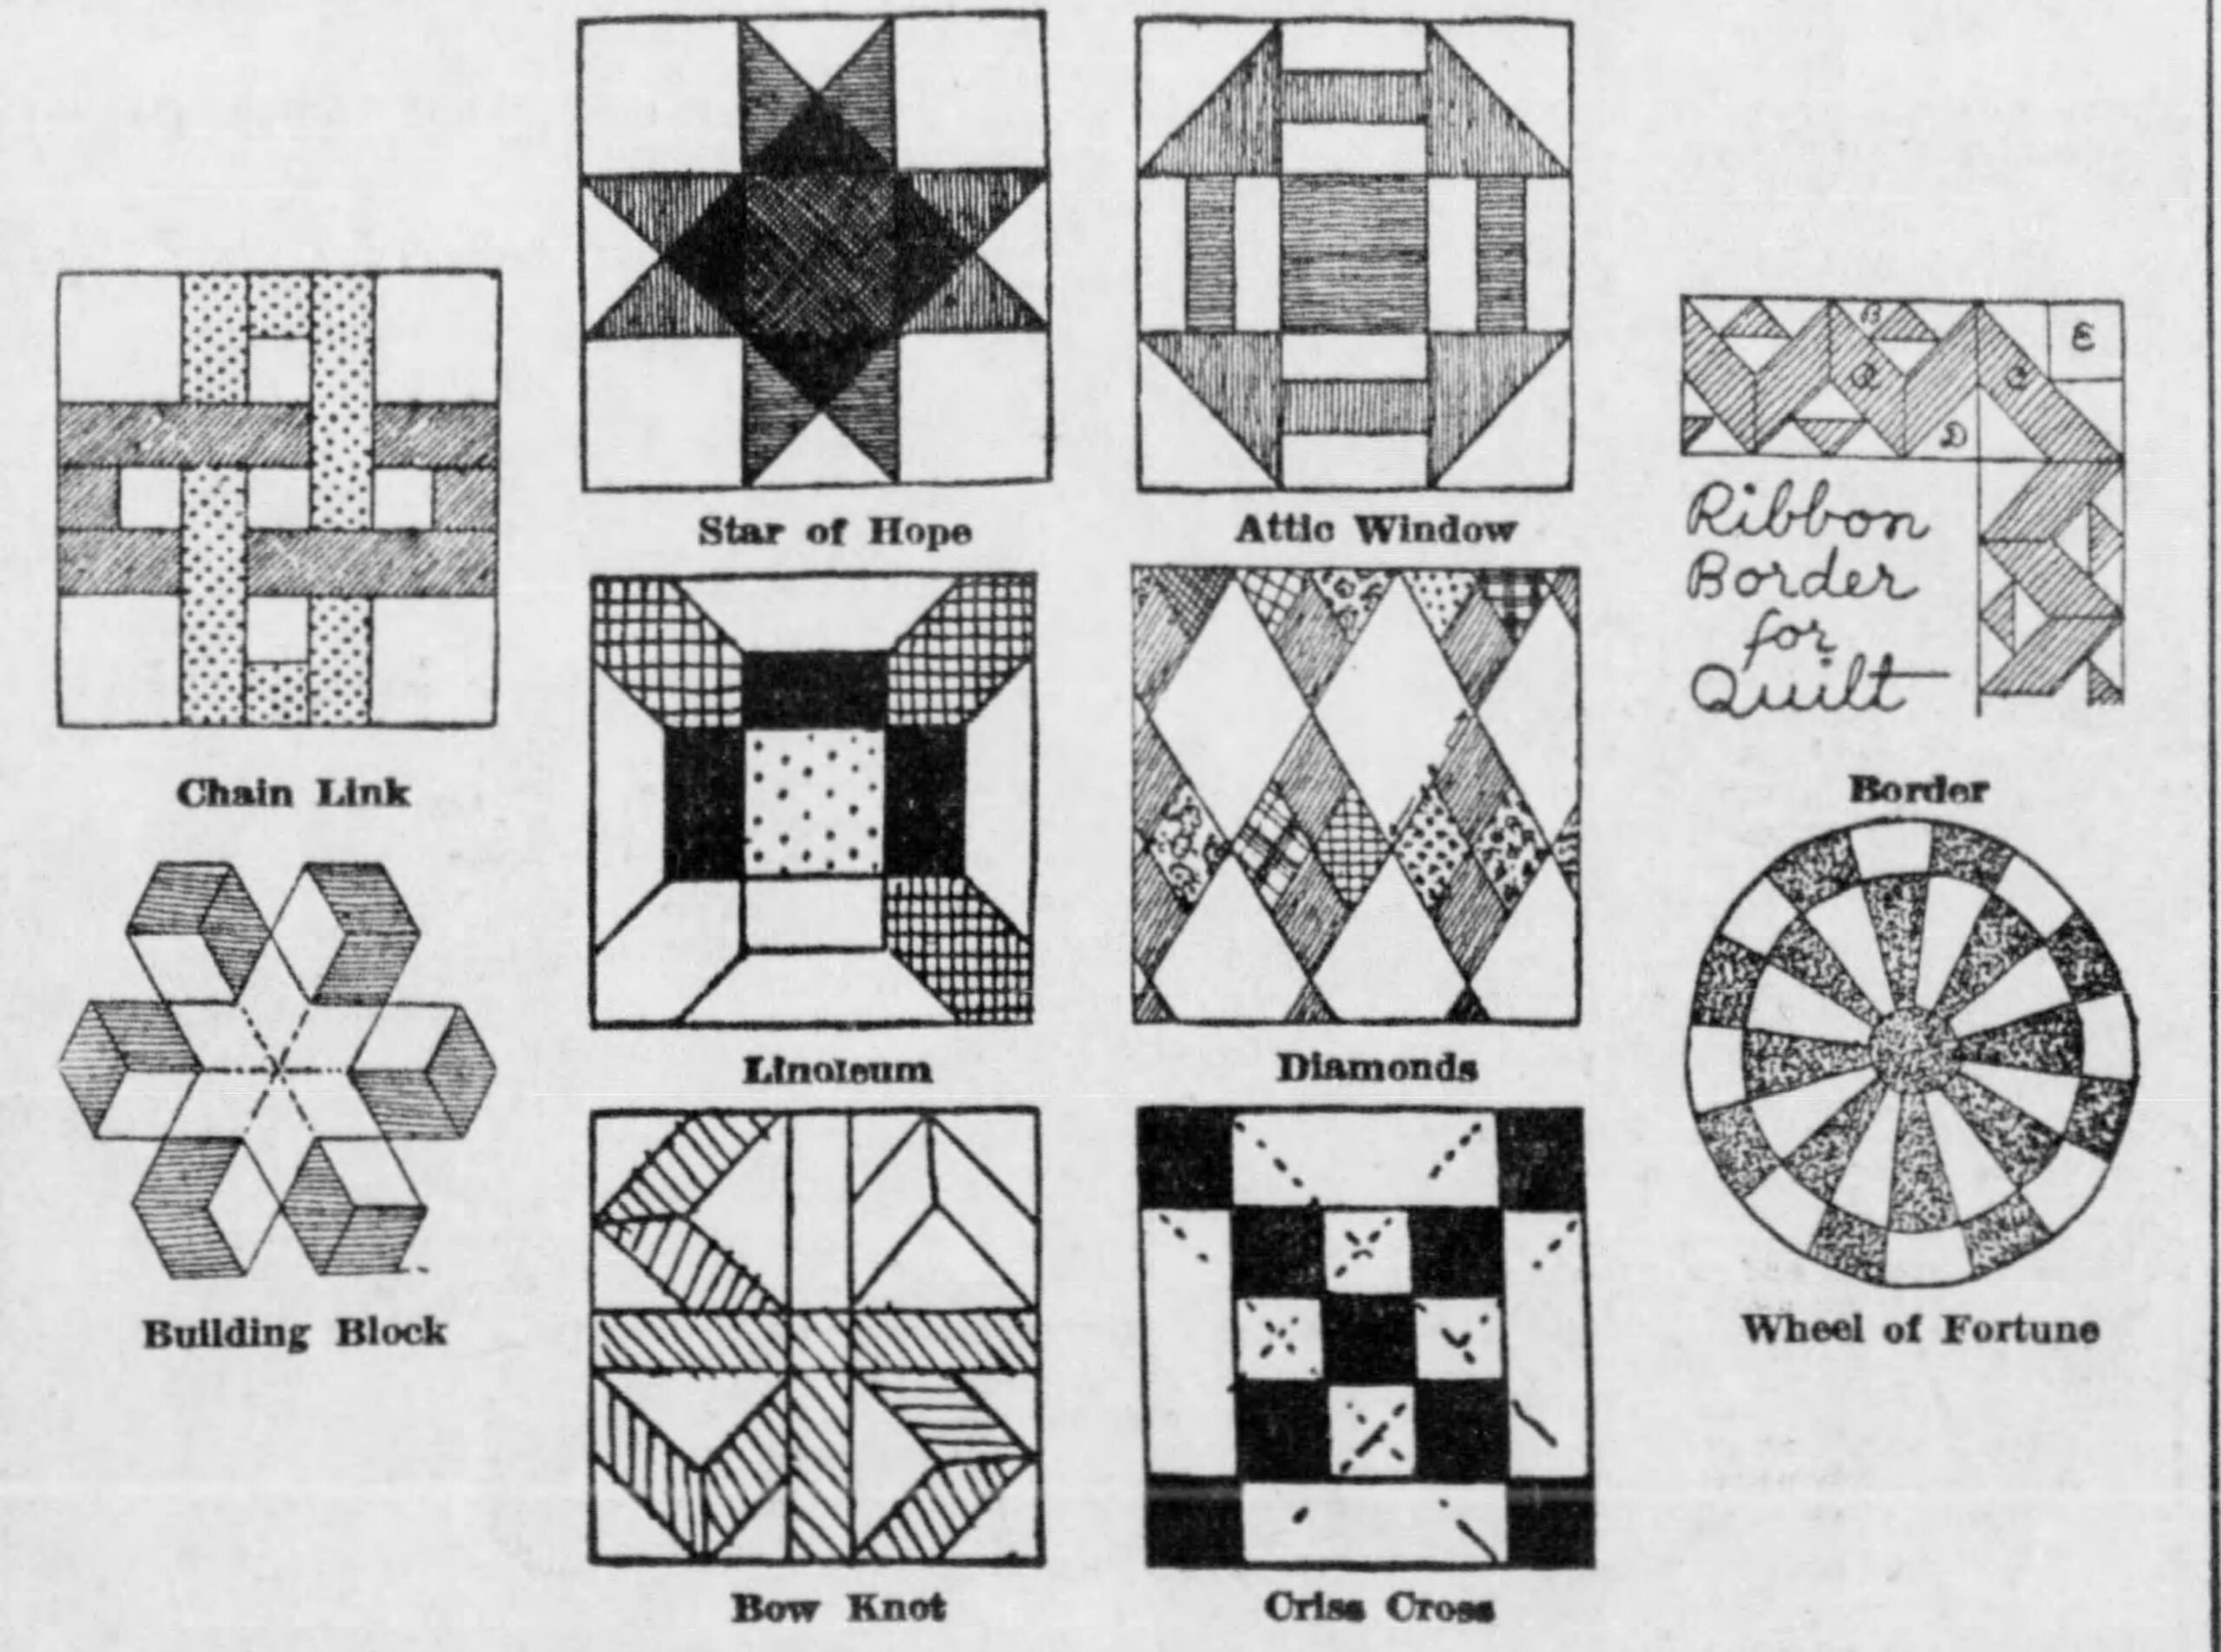 Image from a 1934 ad for a heirloom quilt pattern book